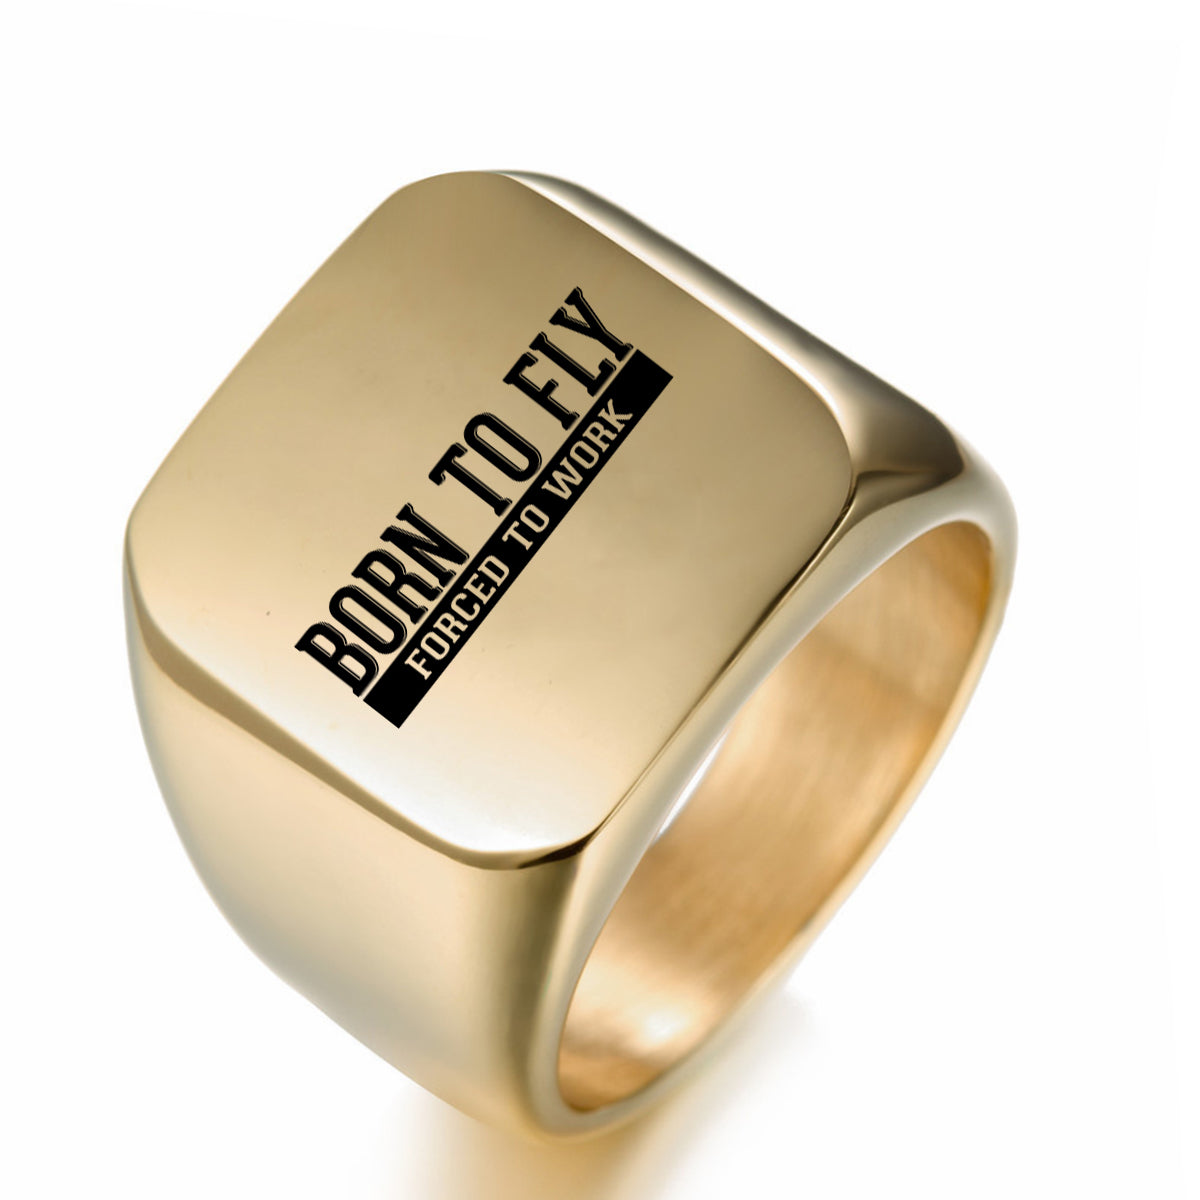 Born To Fly Forced To Work Designed Men Rings